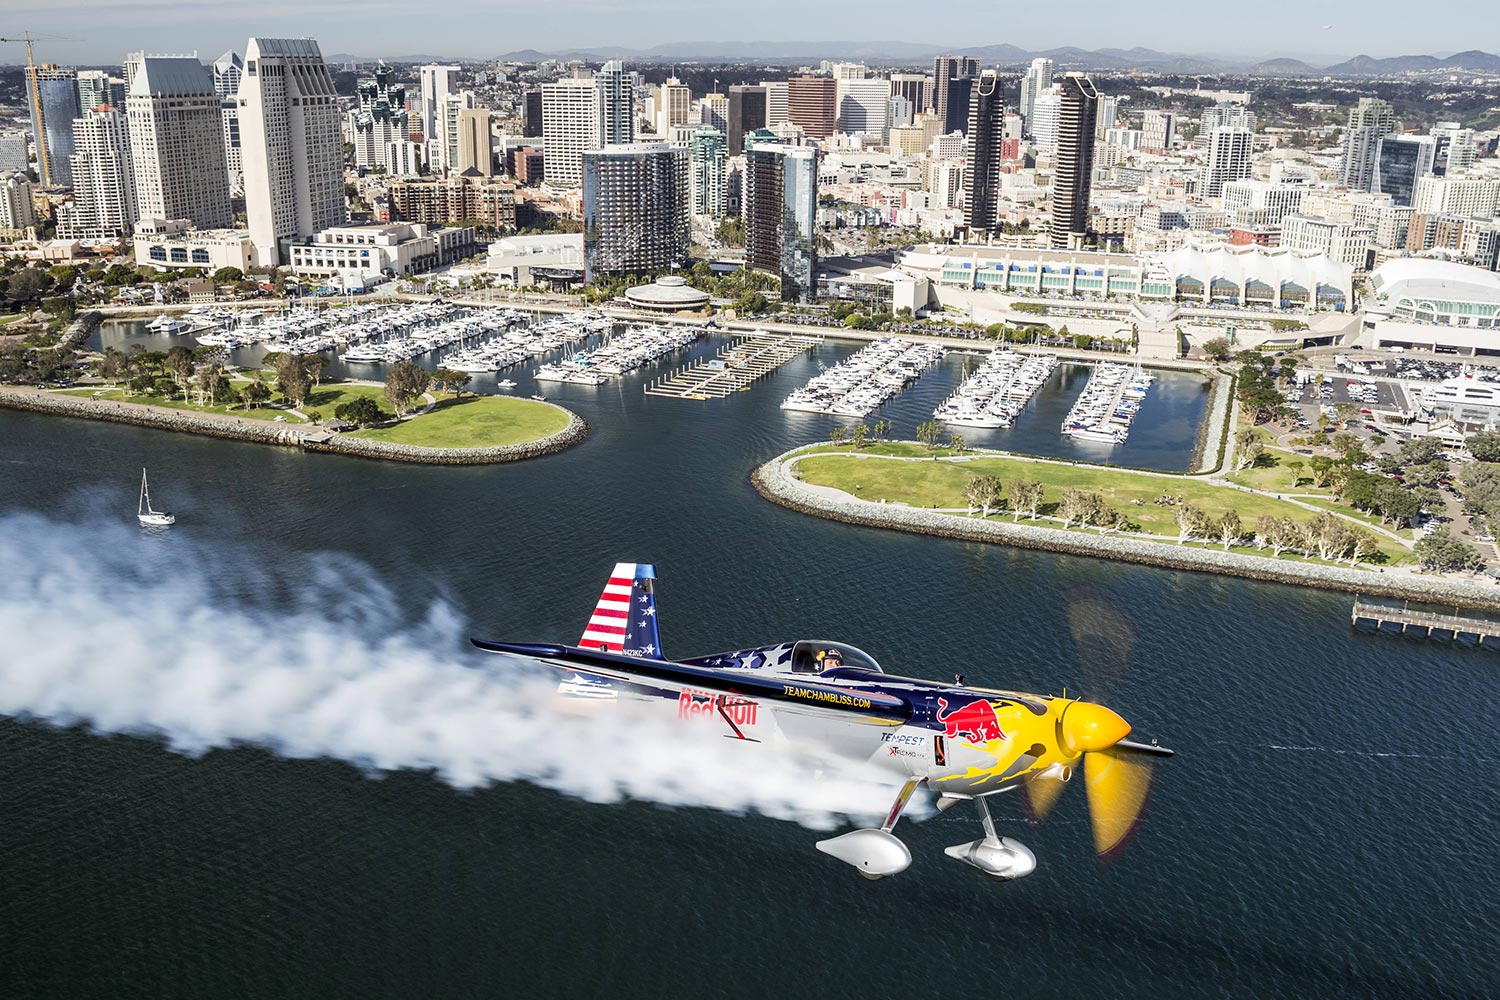 judging red bull air races with tech race san diego preview 1  chris tedesco redbull content pool